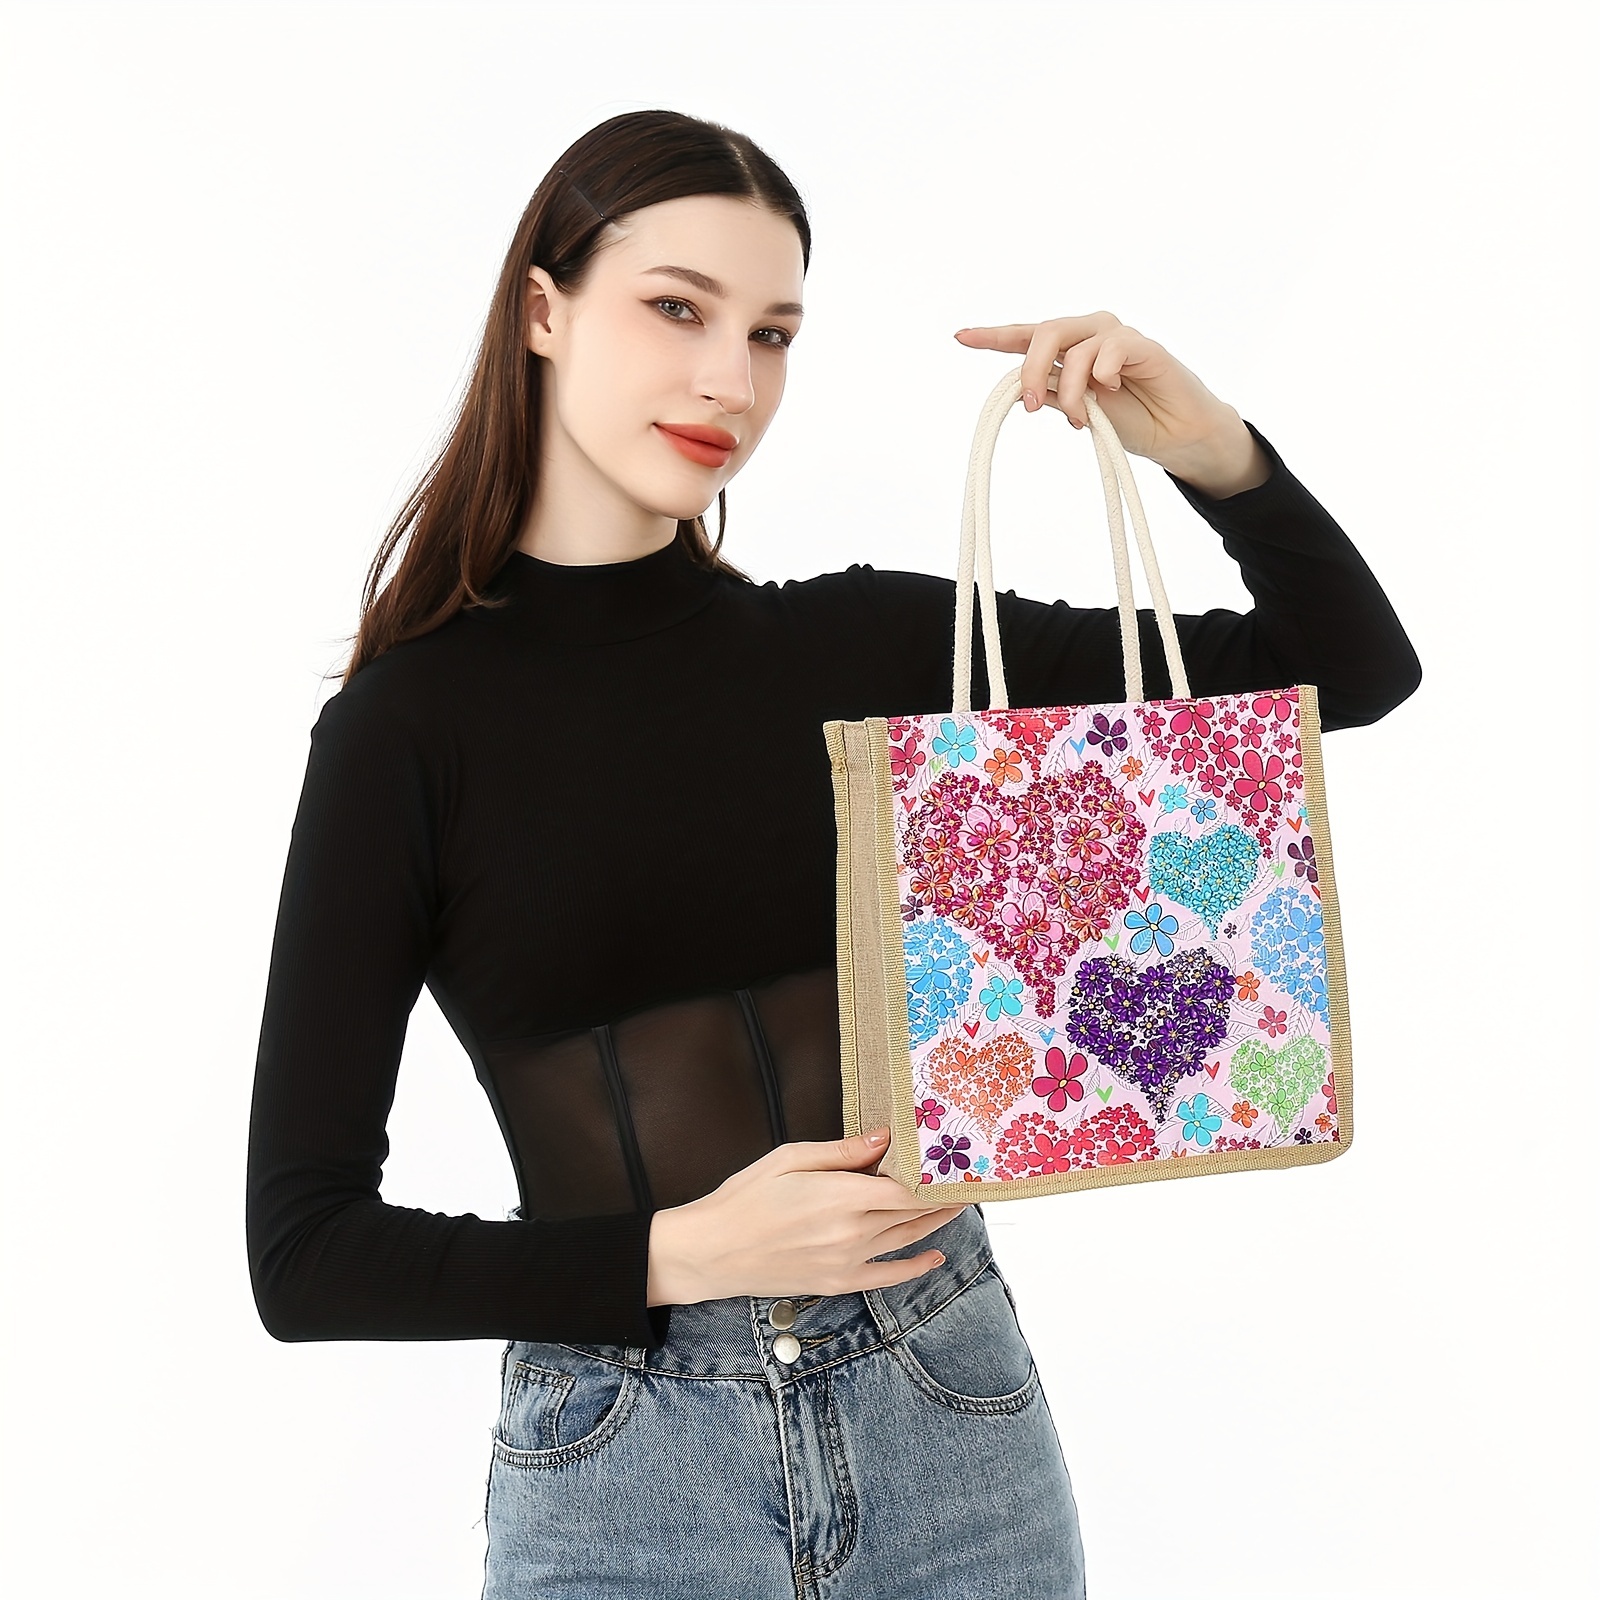 Woxinda Cotton Canvas Tote Bag with Diamonds 5D DIY Diamond Painting Reusable Grocery Bags for Women Durable Fashionable Bags Camera Shoulder Bag